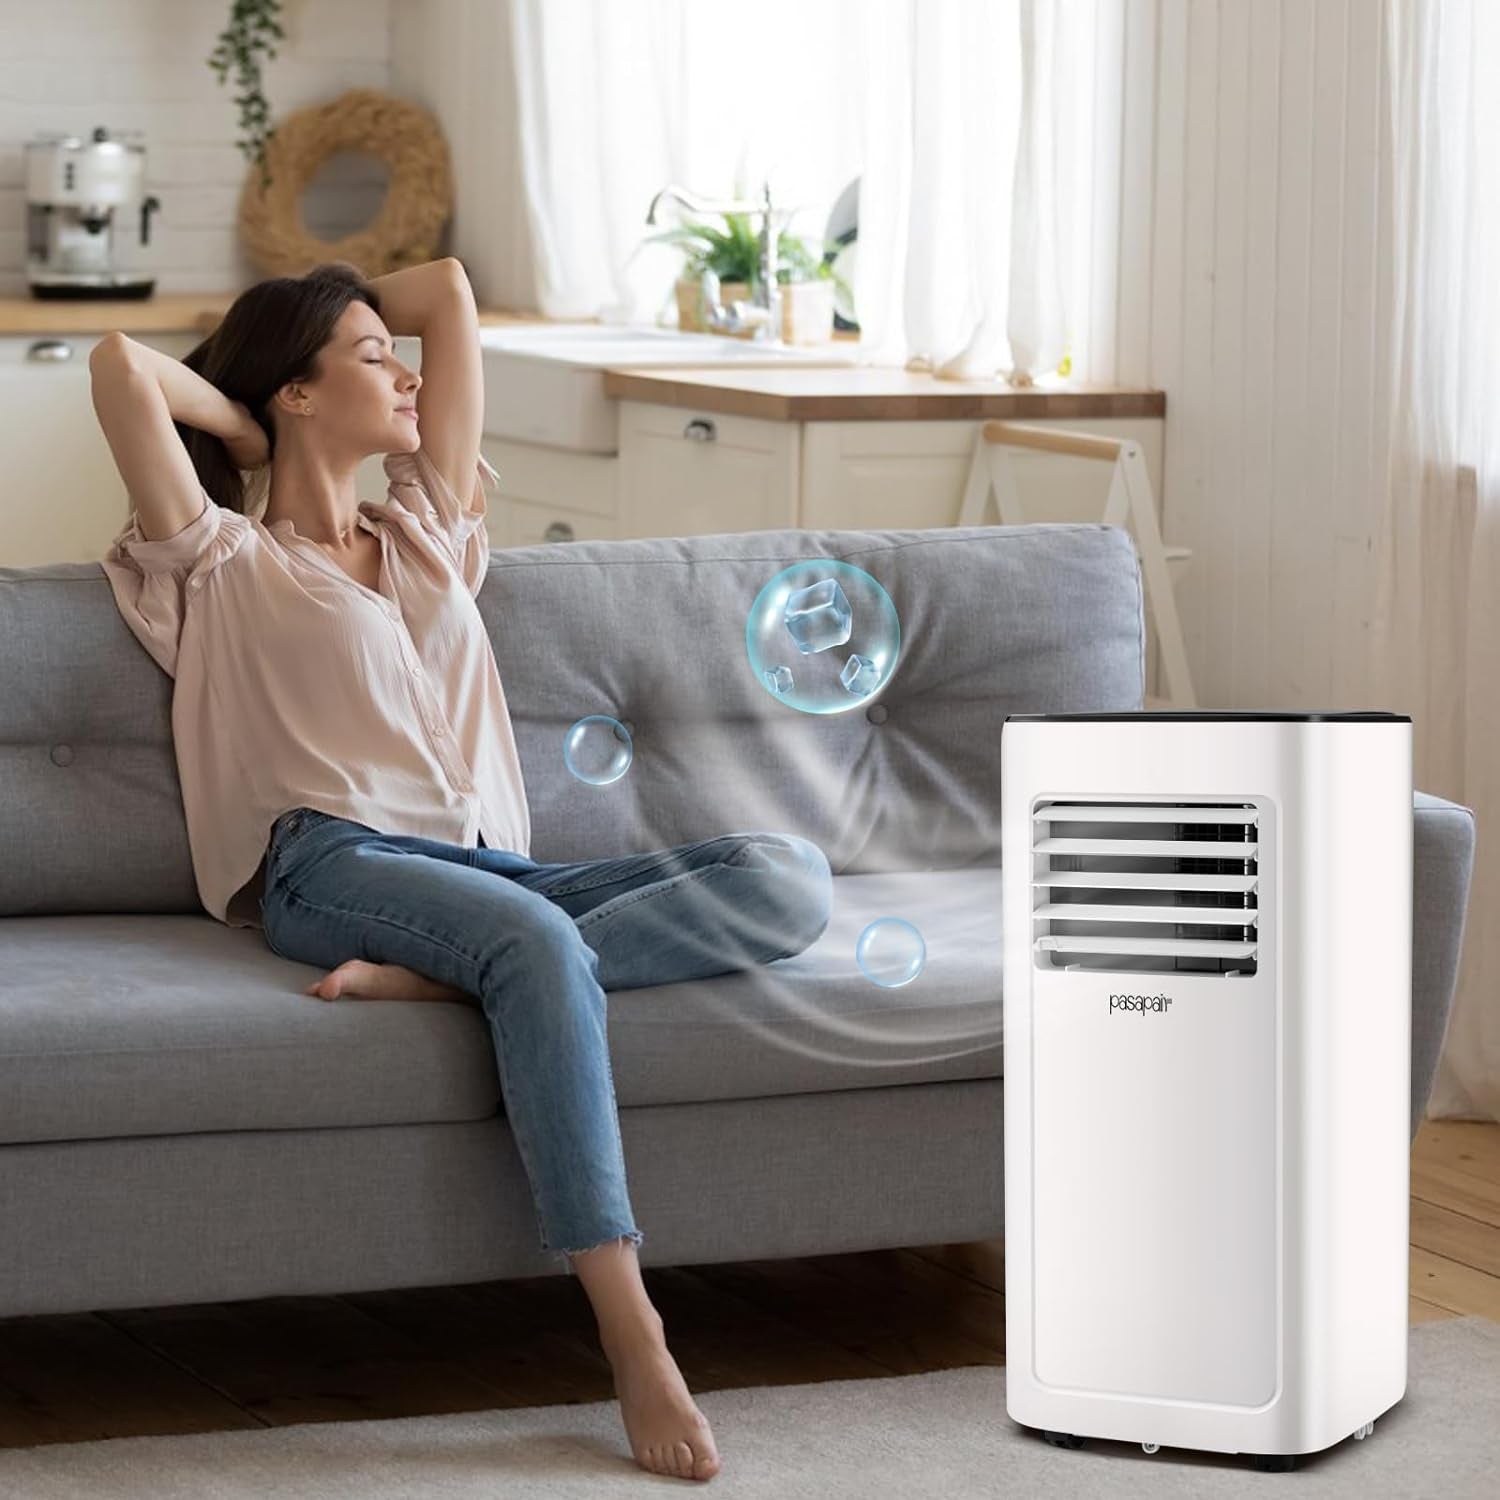 10000BTU Wifi Portable Air Conditioner – Portable AC with Remote&App Control – 4-In-1 AC Unit for Room with Cooling, Dehumidifier, Fan, Sleep Model- Efficient and Energy-Saving